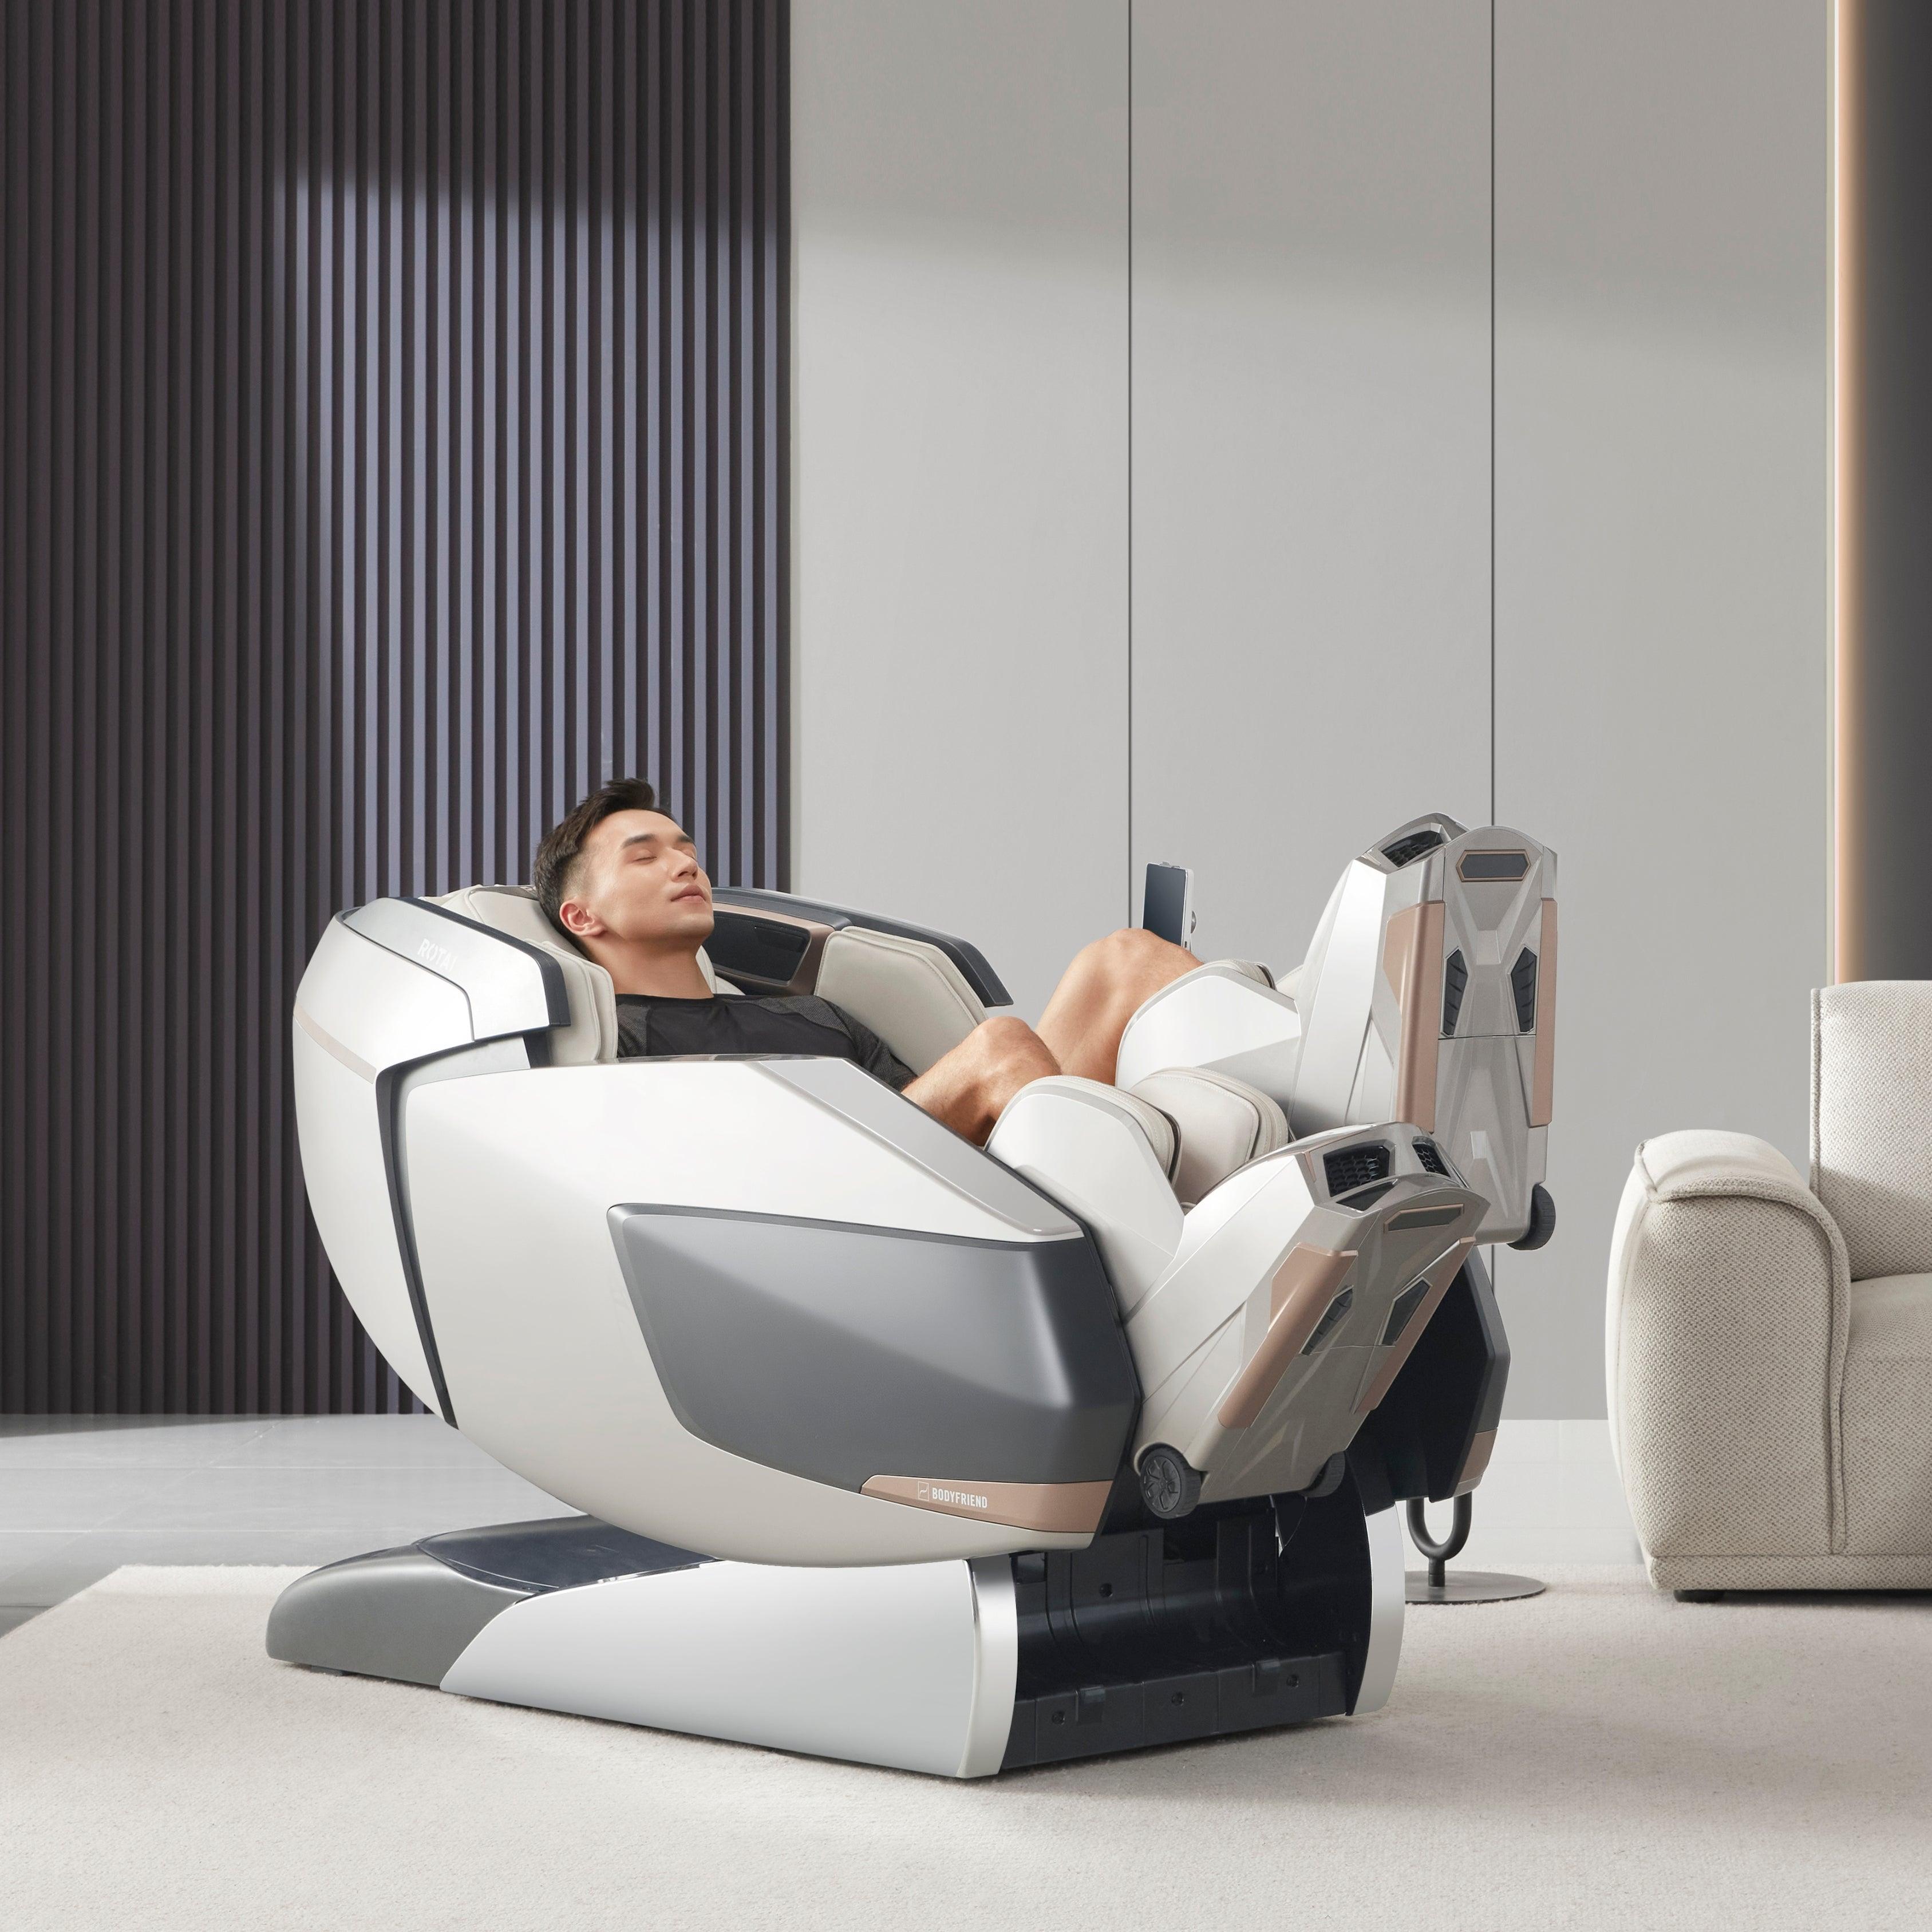 AI Robotic Massage Chair in Glacier Silver with Rovo Walking Technology, best massage chair in UAE, Dubai, enhancing lower body flexibility and circulation, best massage chair uae, massage chair Dubai, massage chair uae, massage chair Saudi Arabia, كرسي ا